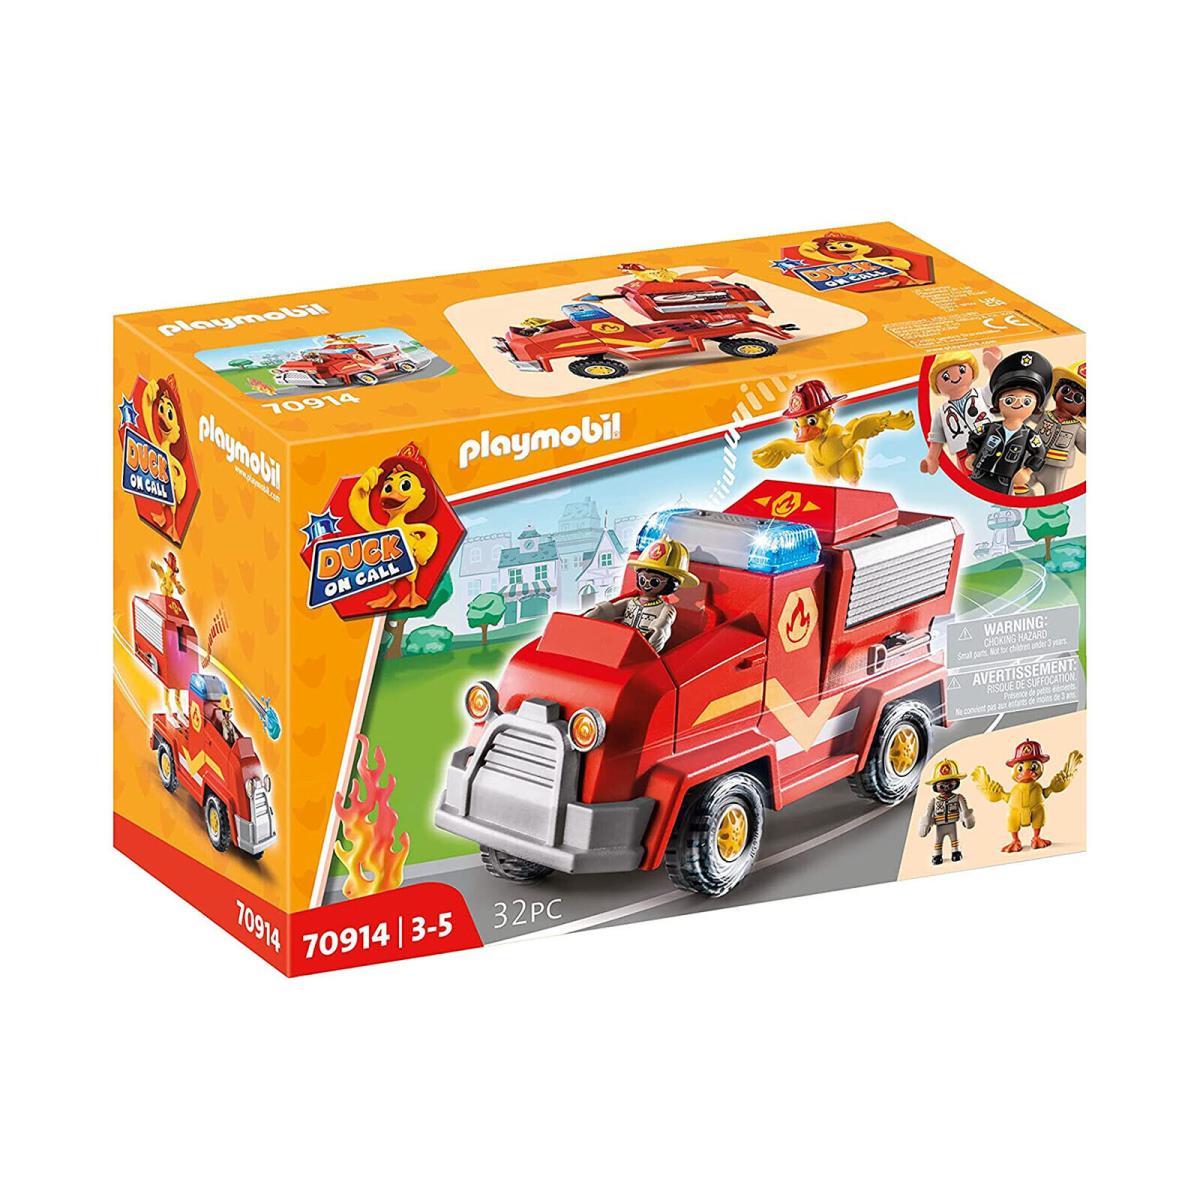 Playmobil Duck On Call Fire Brigade Emergency Vehicle Building Set IN Stock